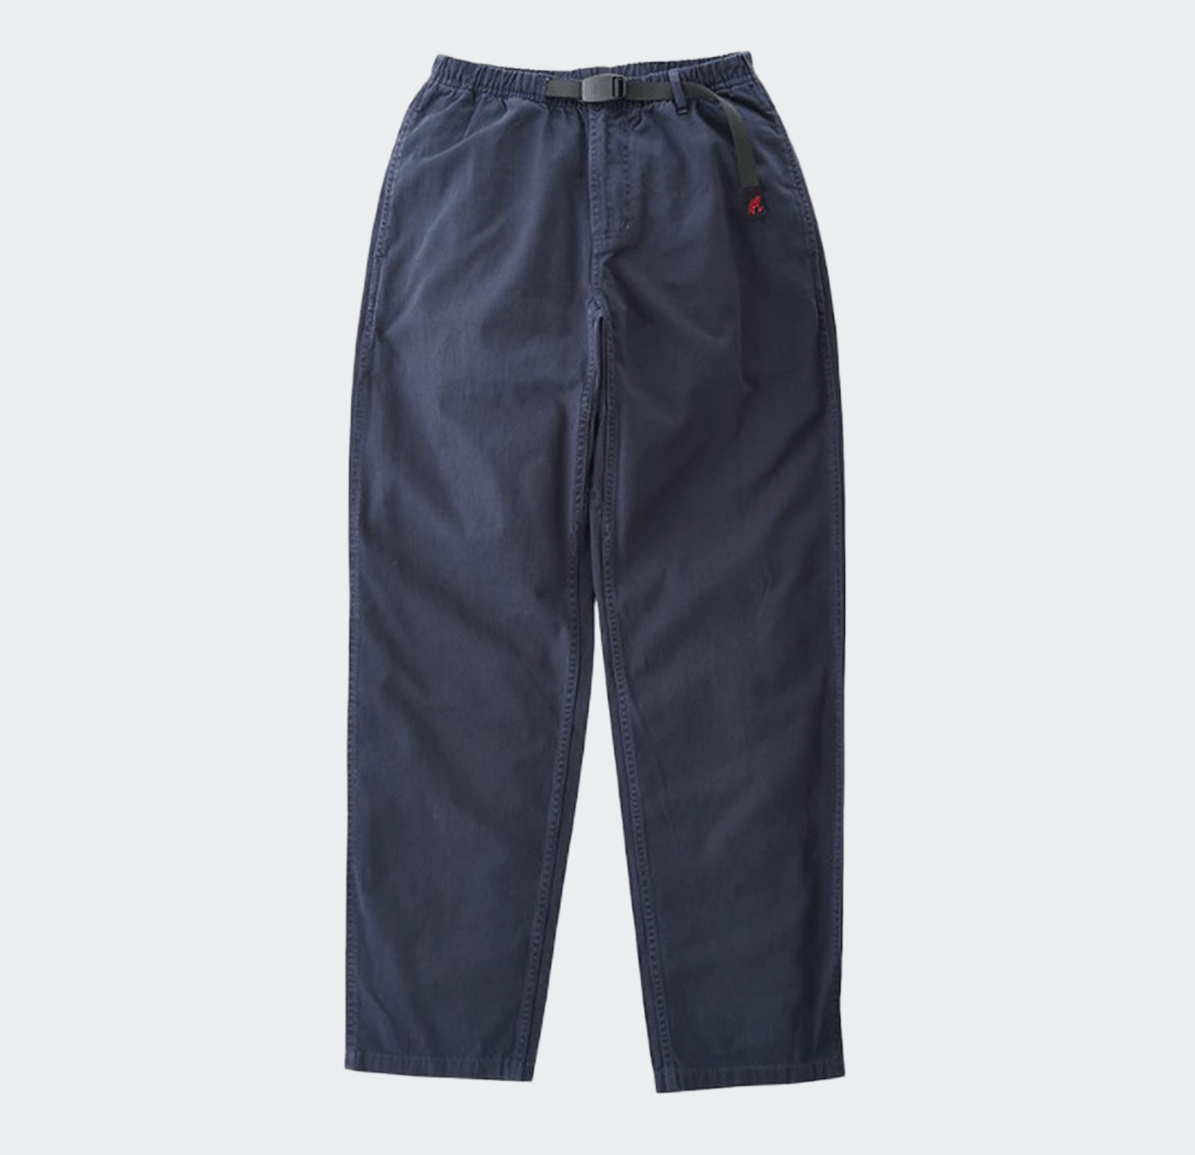 Gramicci Gramicci Pant - Double Navy - Gramicci - State Of Play